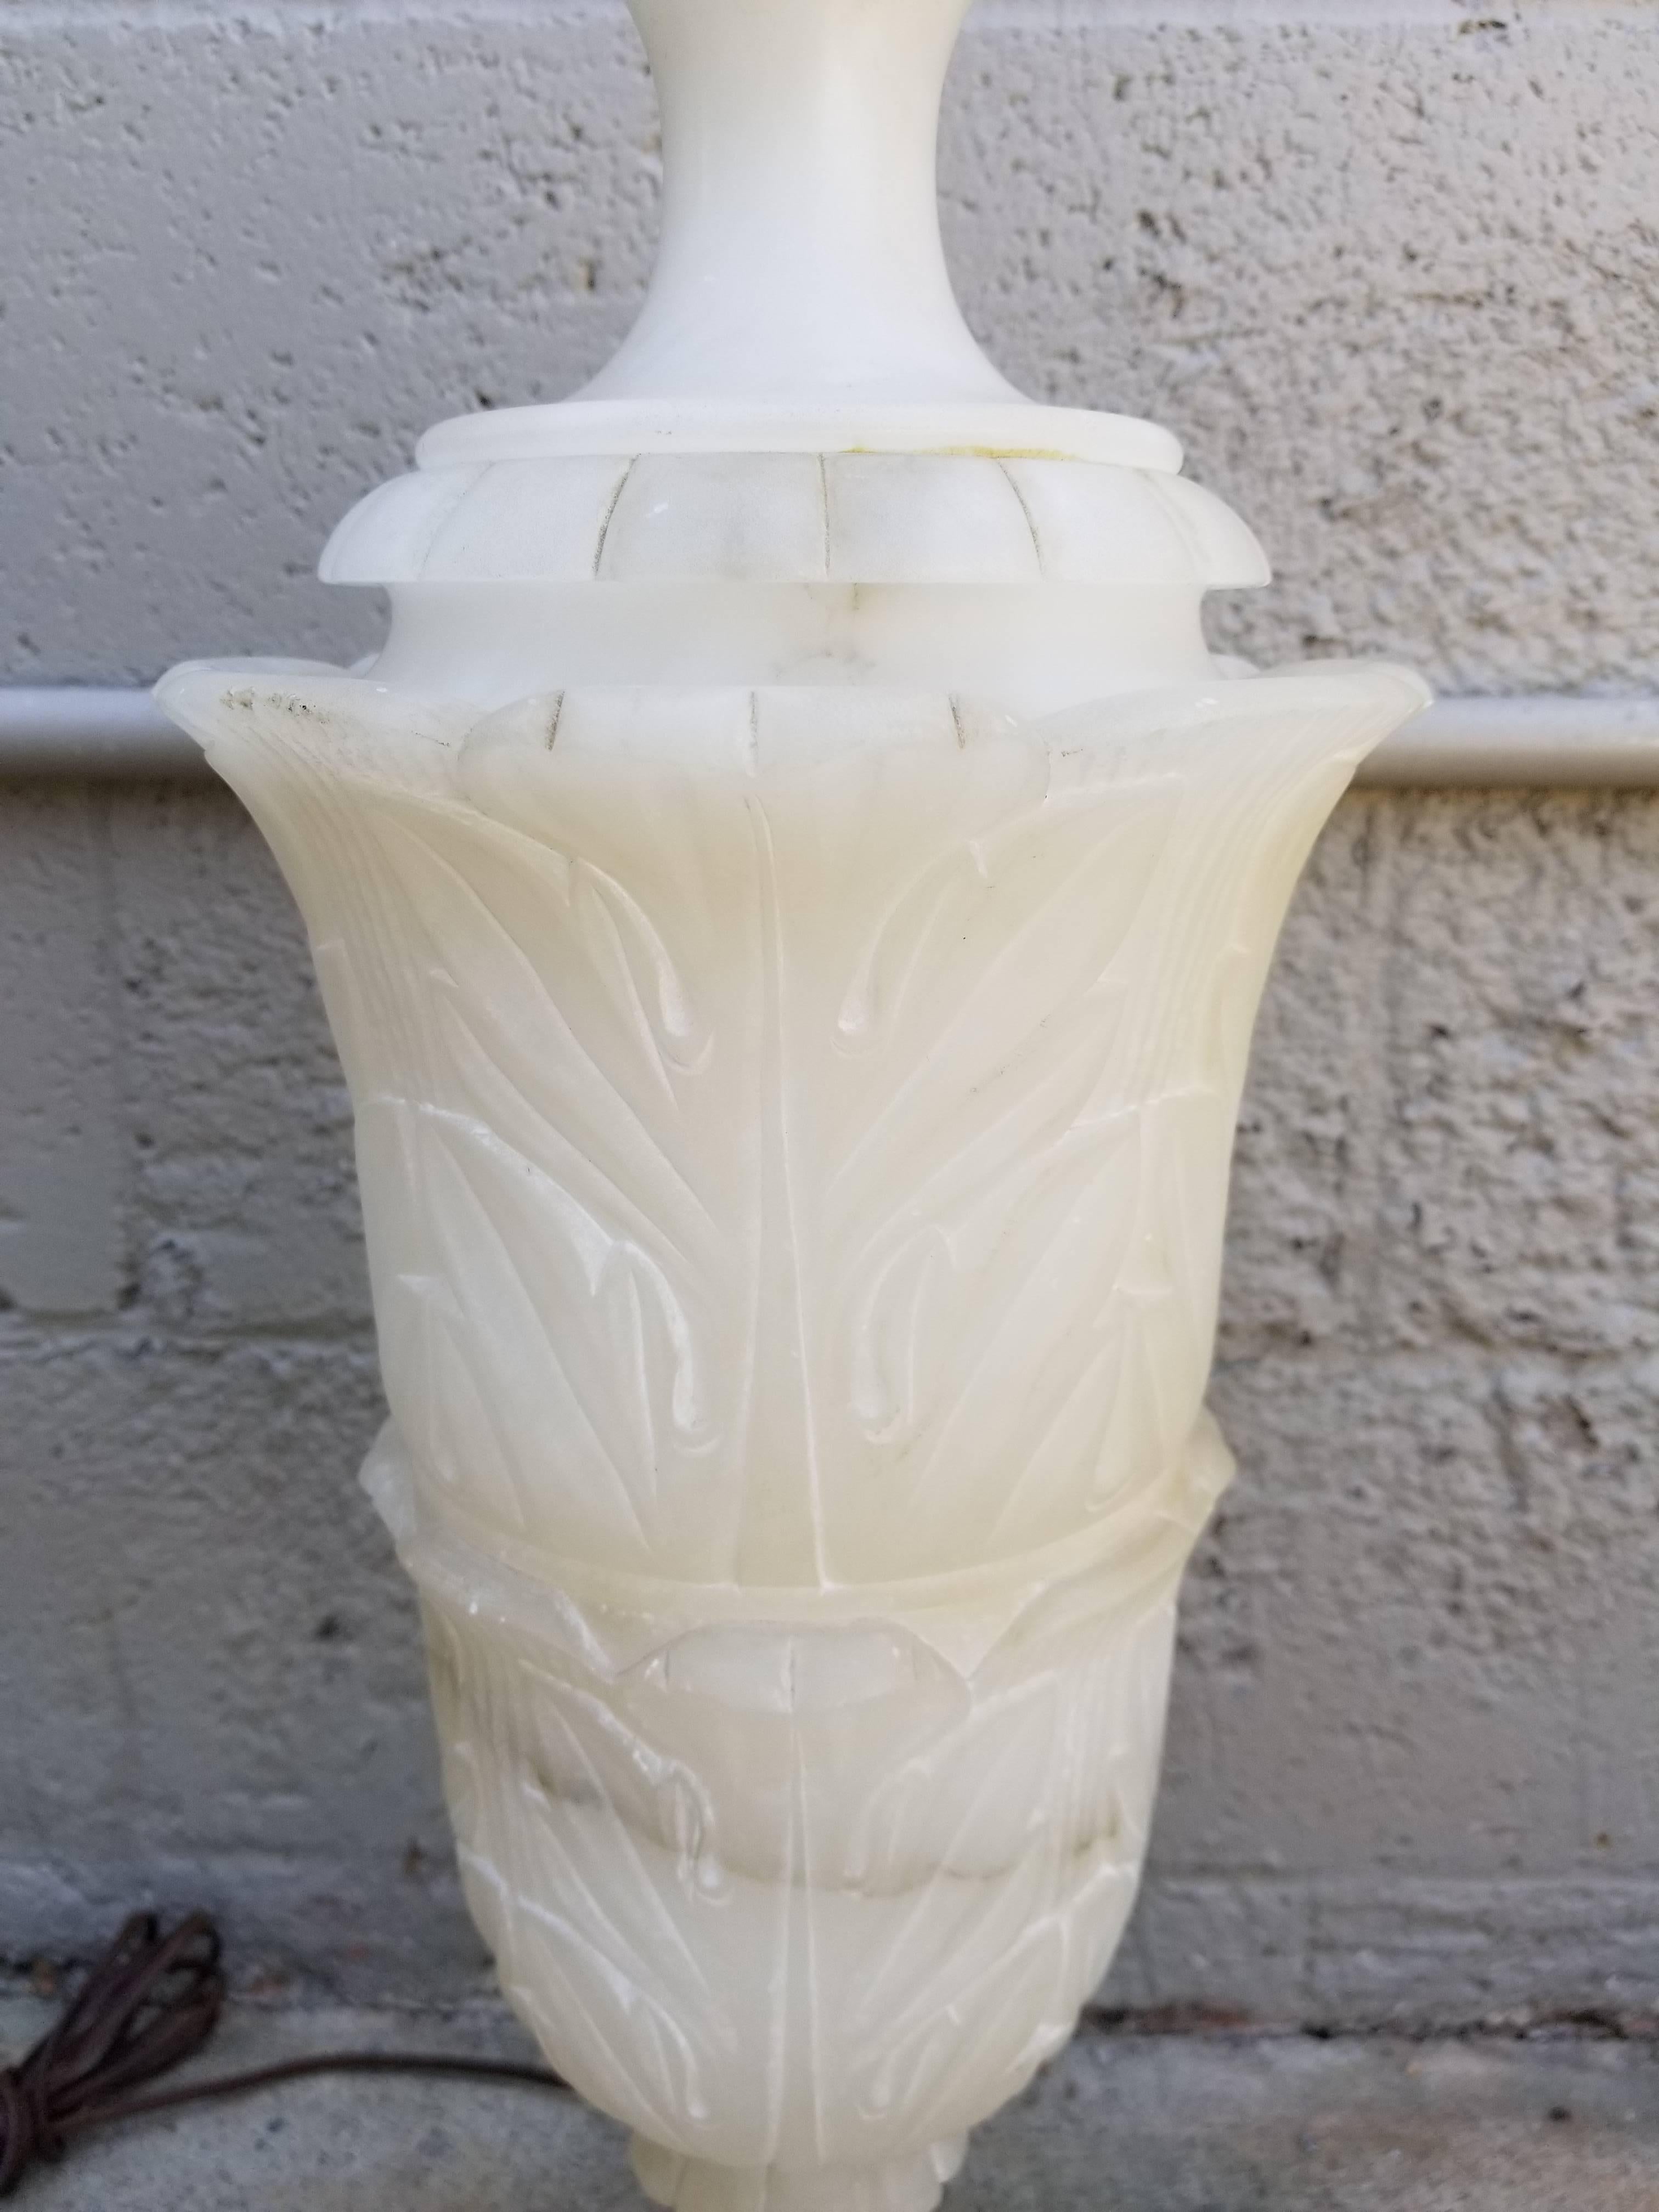 Large-Scale Alabaster Table Lamp In Excellent Condition For Sale In Fulton, CA